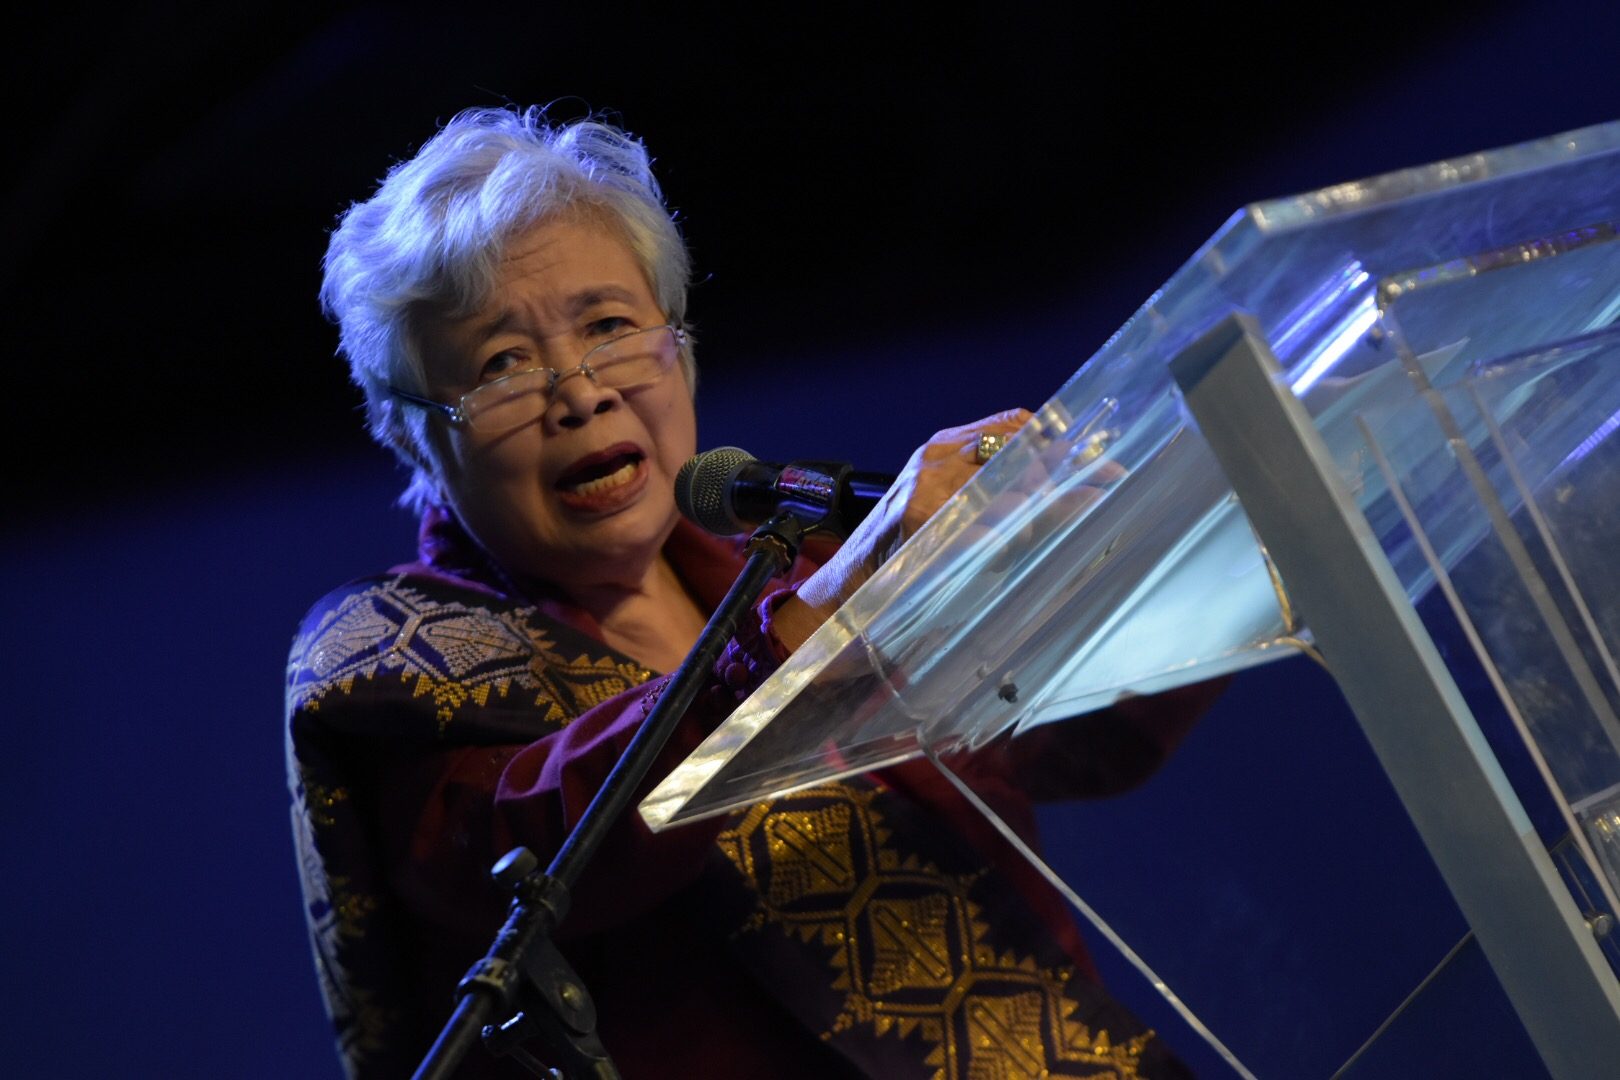 Briones to teachers: Open new paths, but always stick to the truth